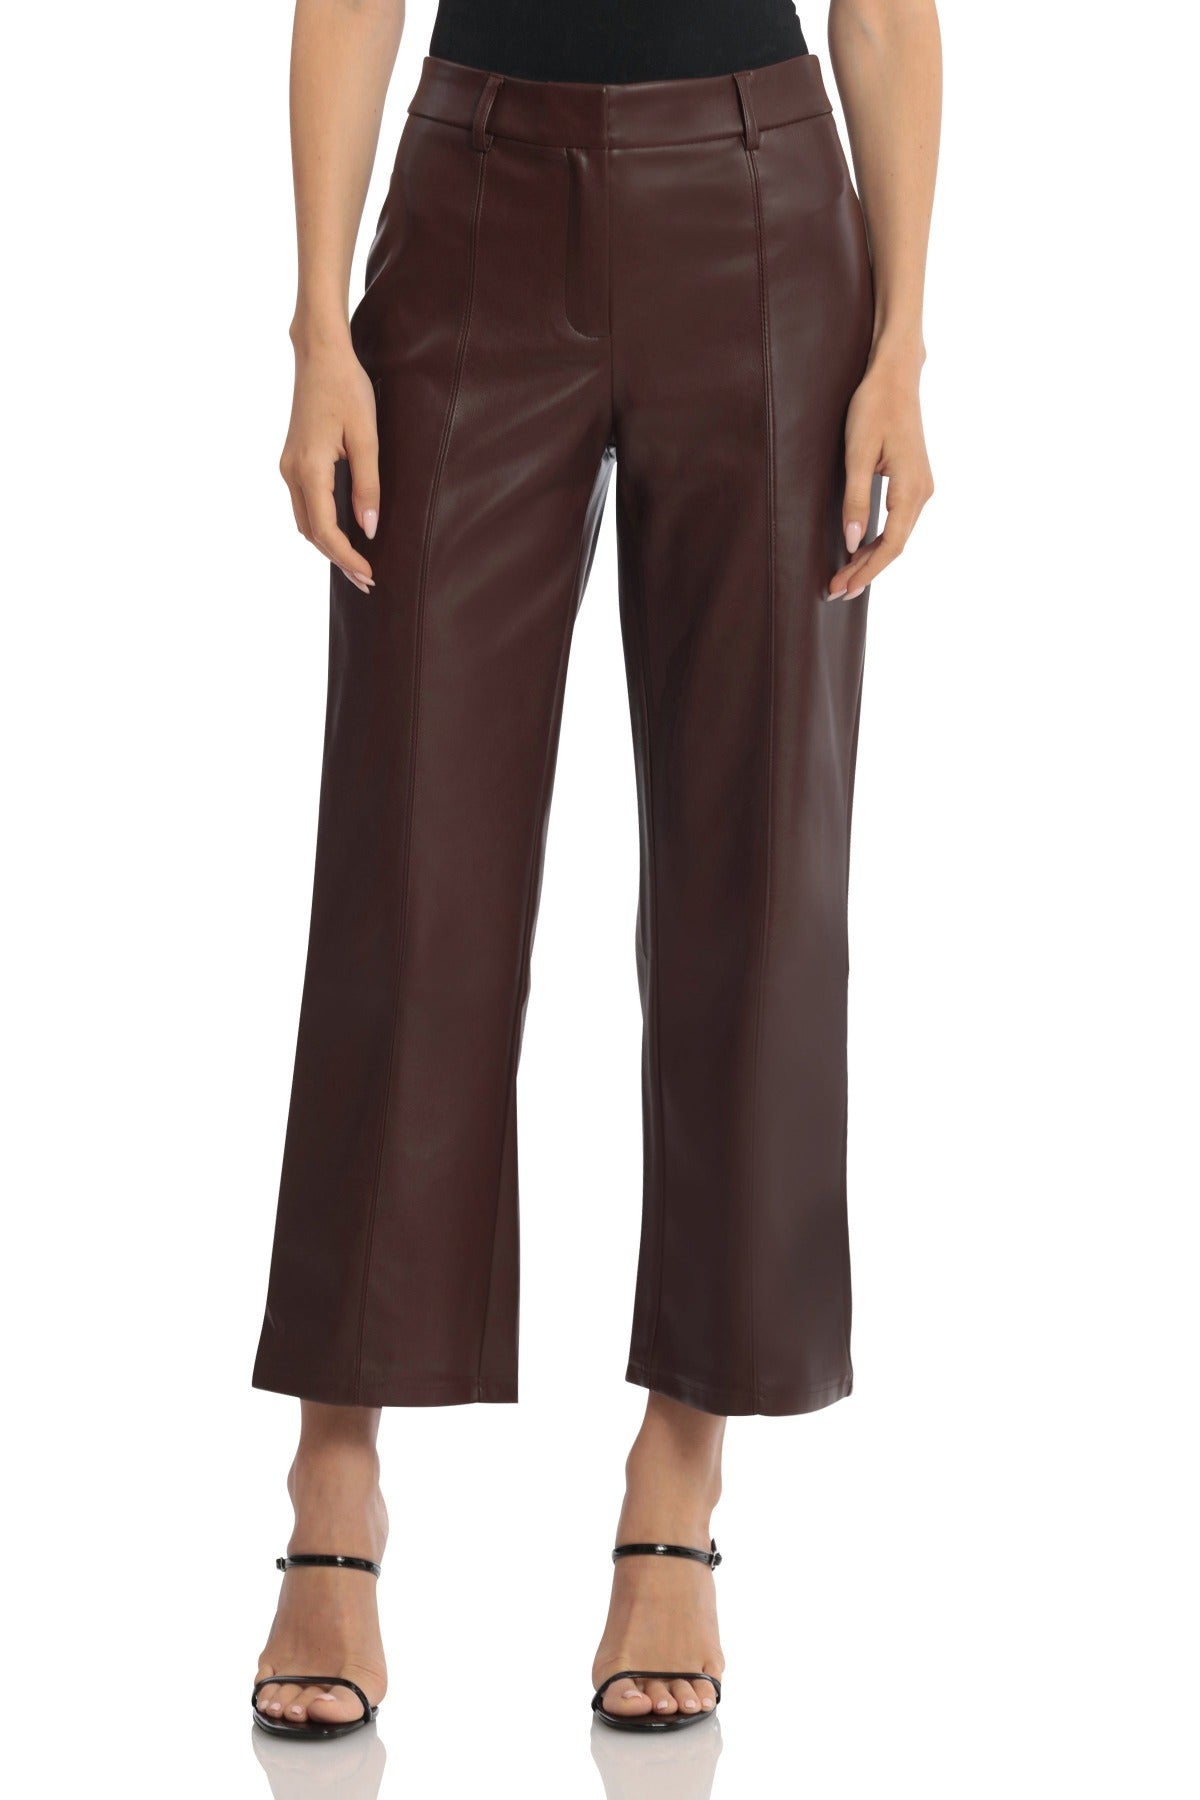 Faux Leather Seam-Front Straight Leg Trouser Pants Chocolate Brown - Women's Flattering Office to Date Night Bottoms